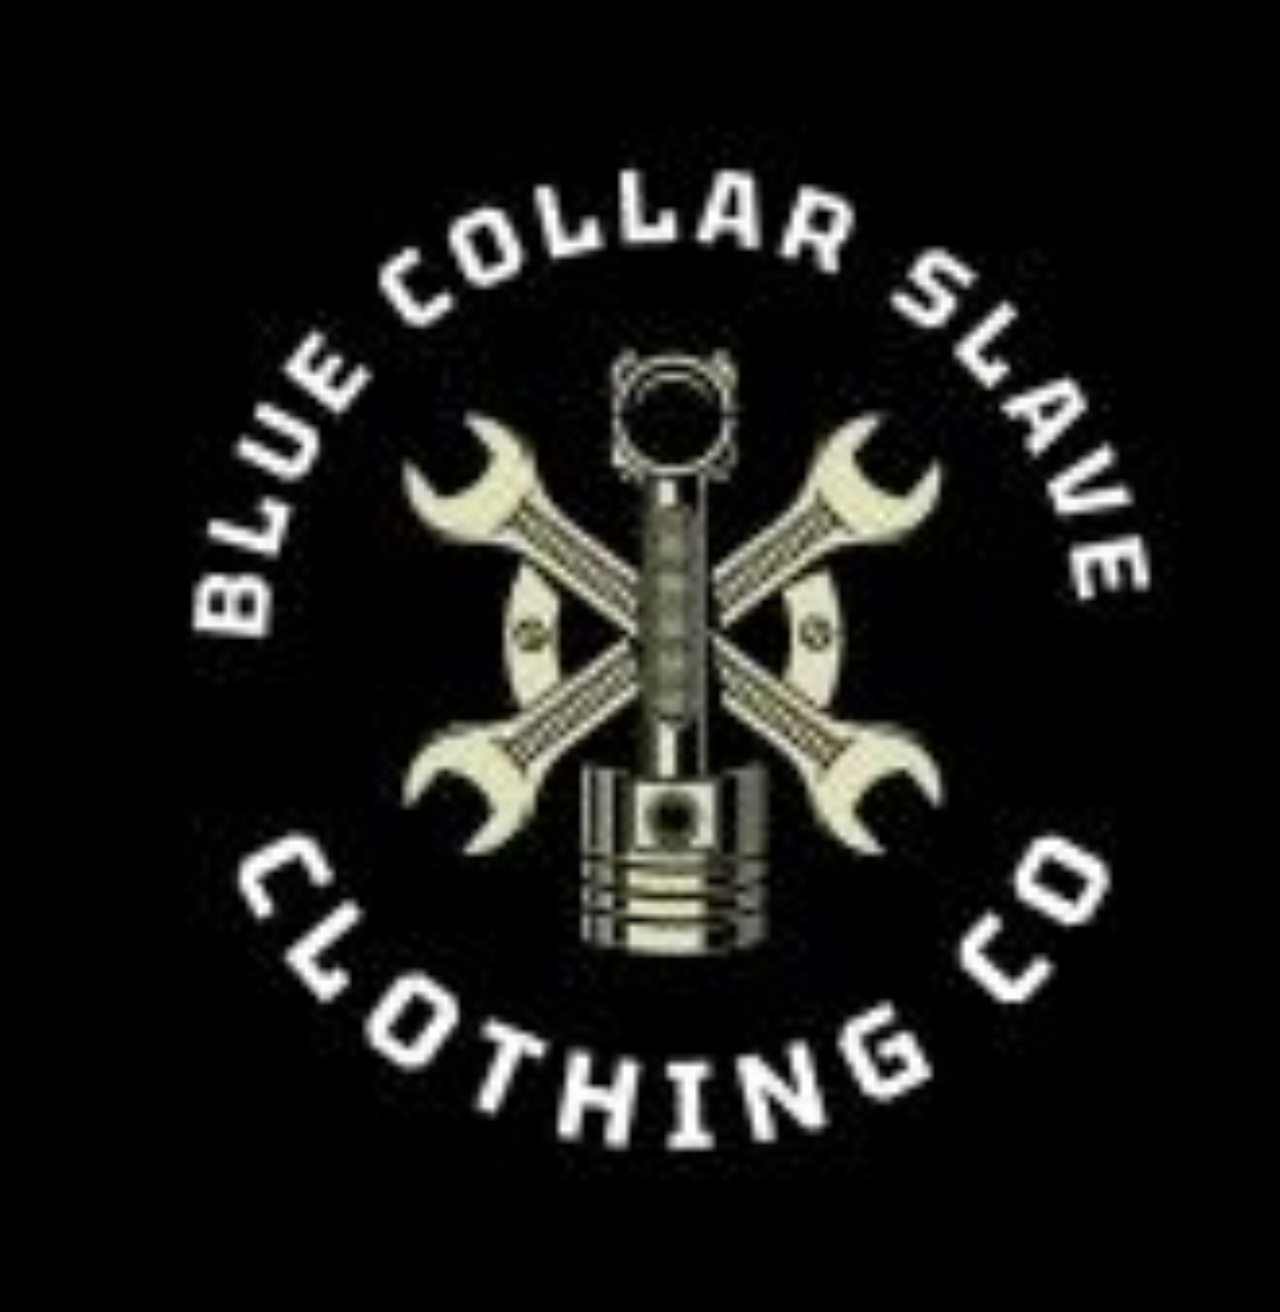 Blue Collar Slave Clothing Co's web page